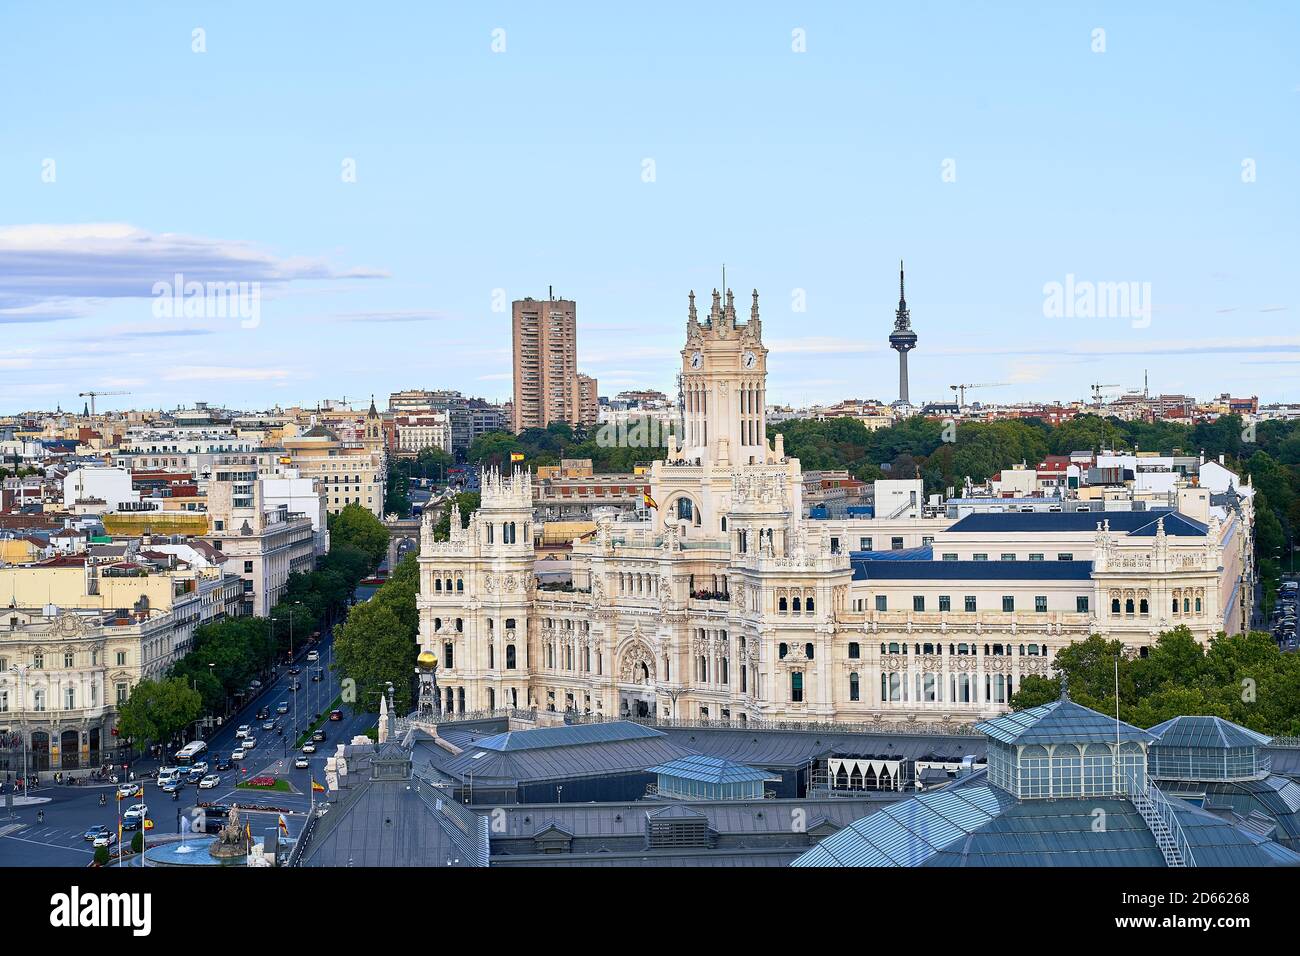 The palace of communications at Cibeles, former post office, Madrid, Spain, September 2020 Stock Photo